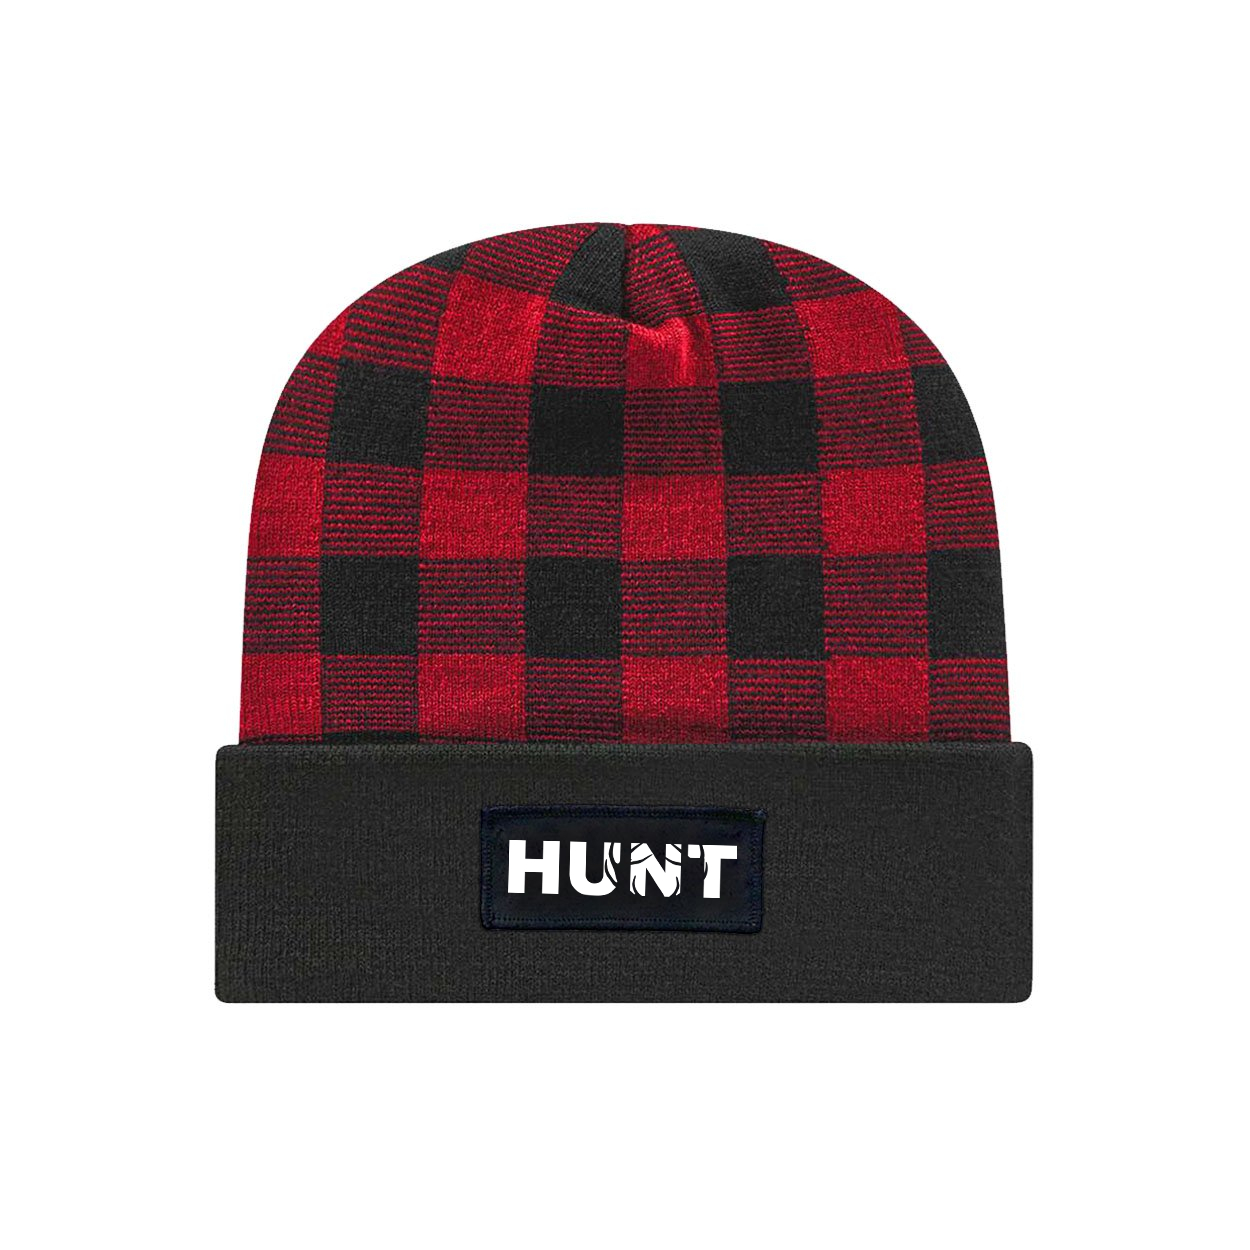 Hunt Rack Logo Night Out Woven Patch Roll Up Plaid Beanie Black/True Red (White Logo)